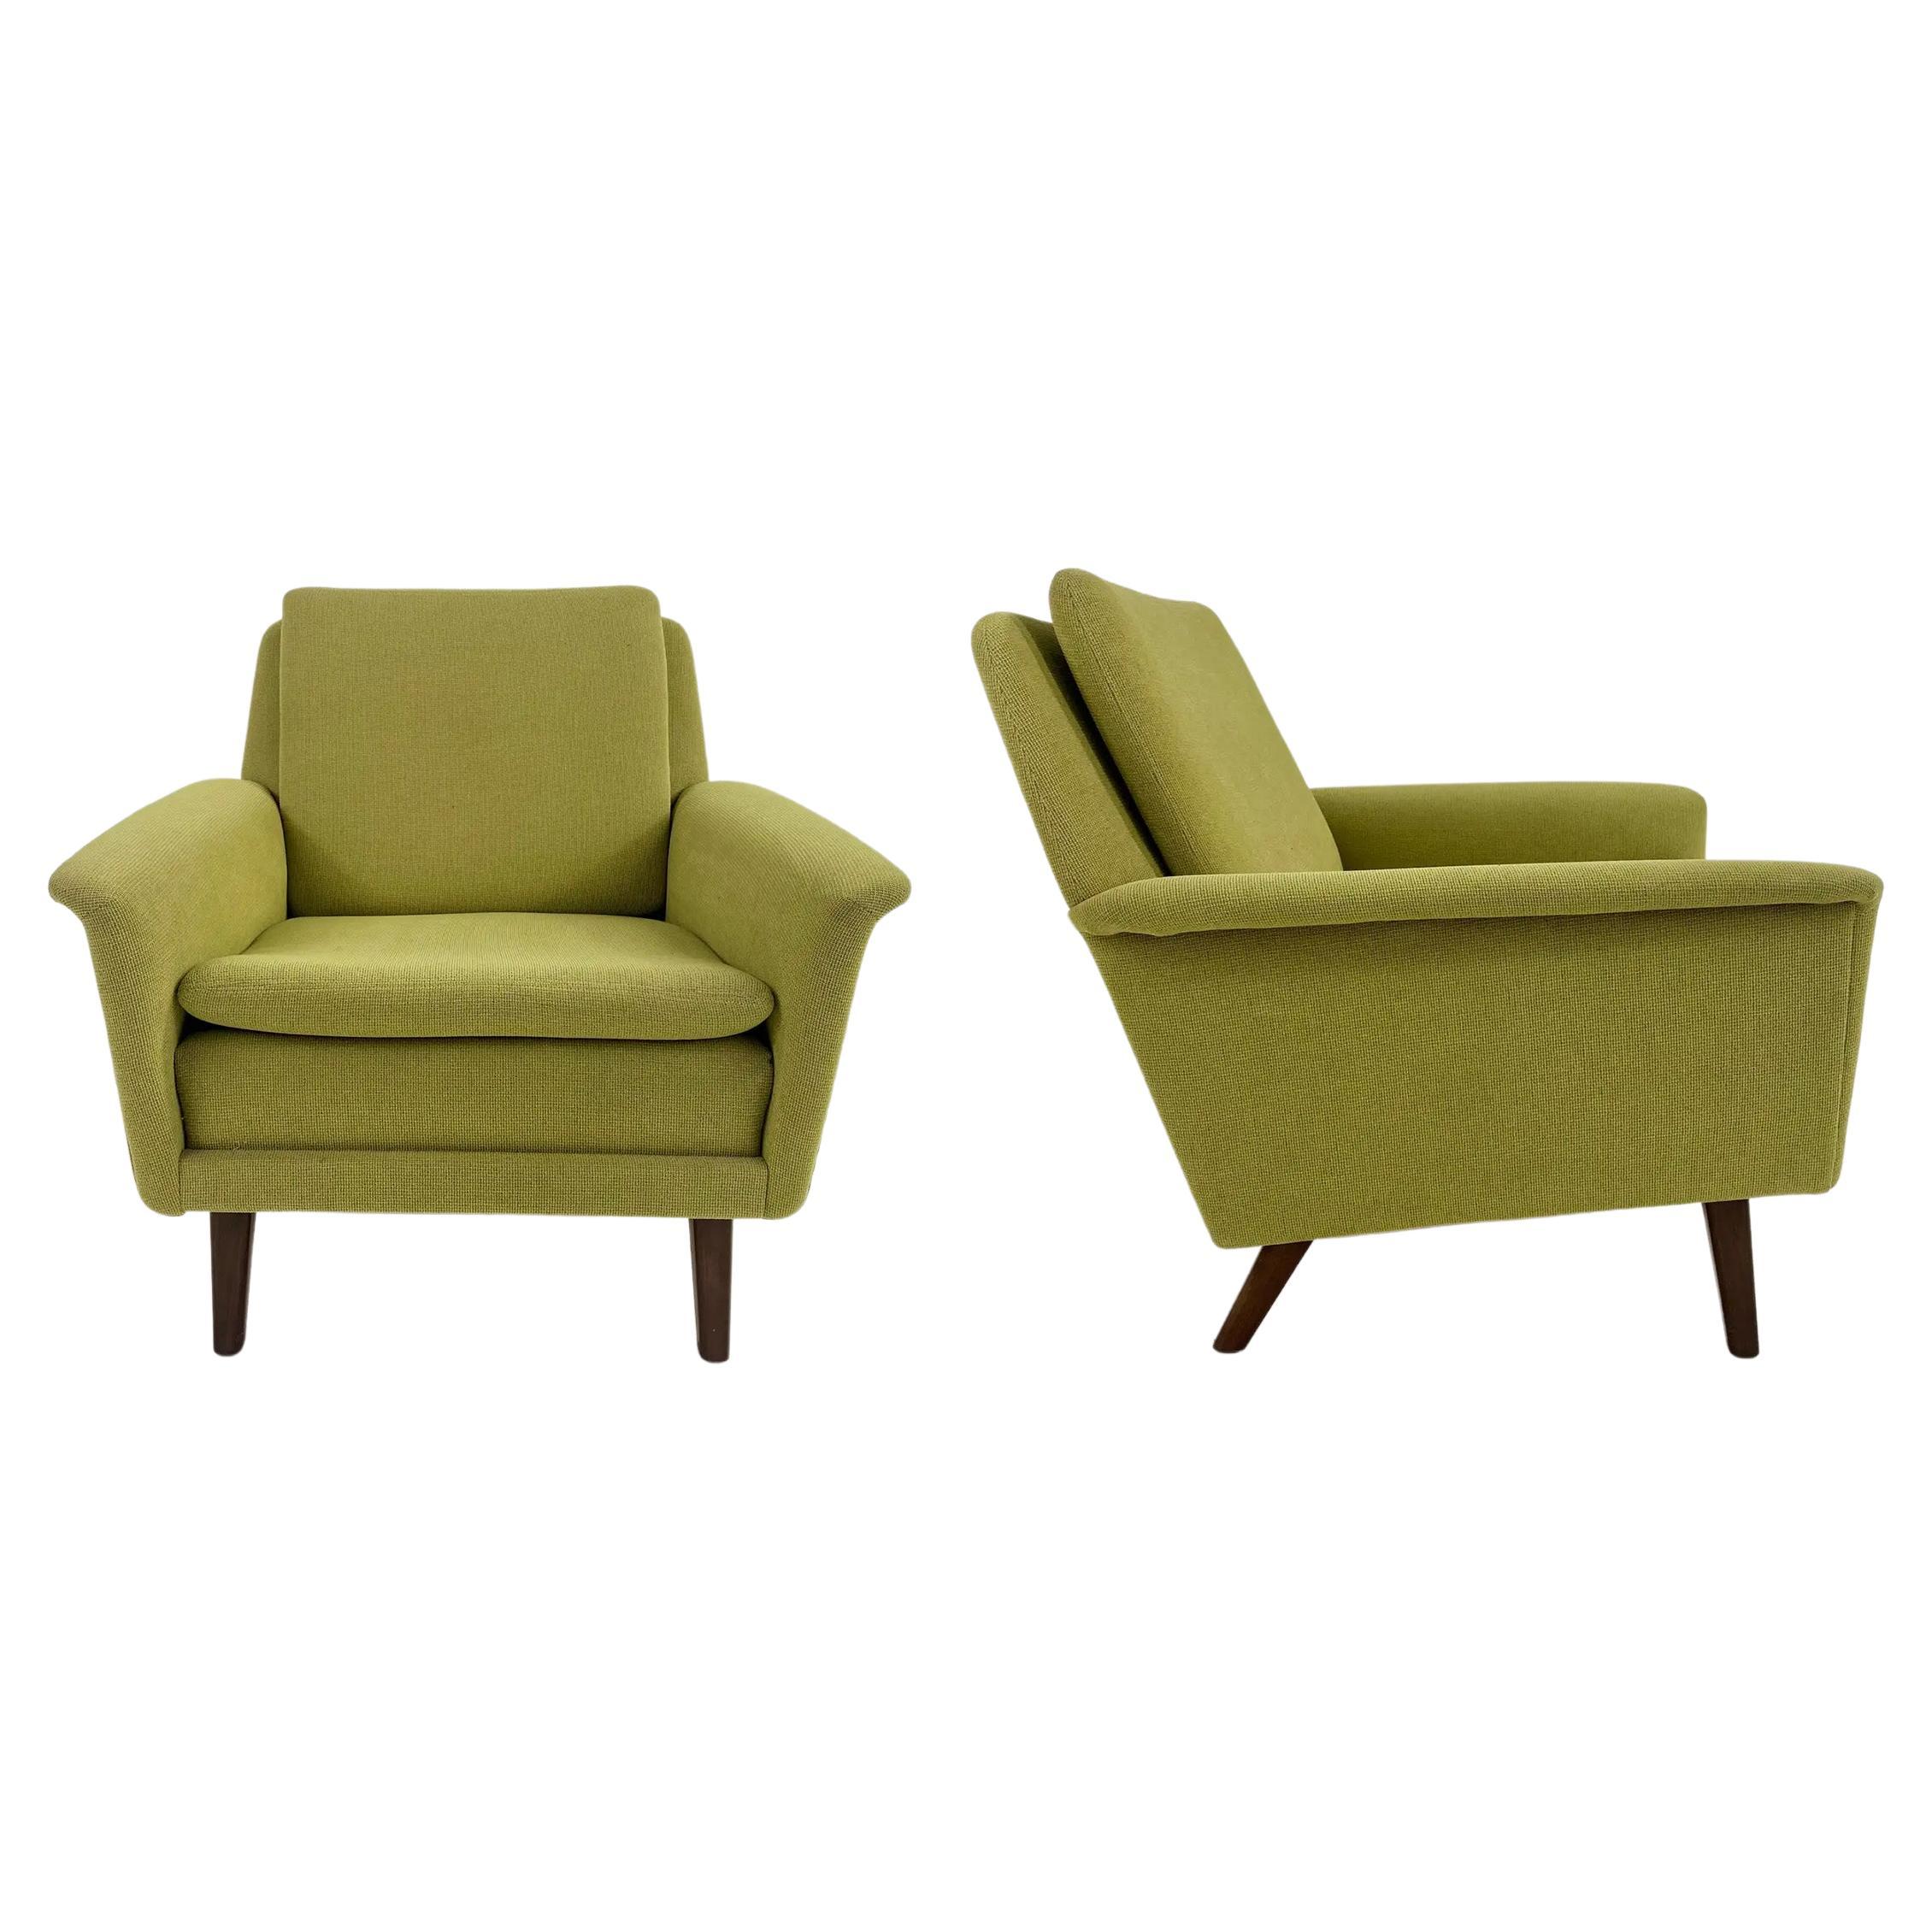 Folke Ohlsson for Fritz Hansen MCM Lounge Chair in Green Upholstery, a Pair For Sale